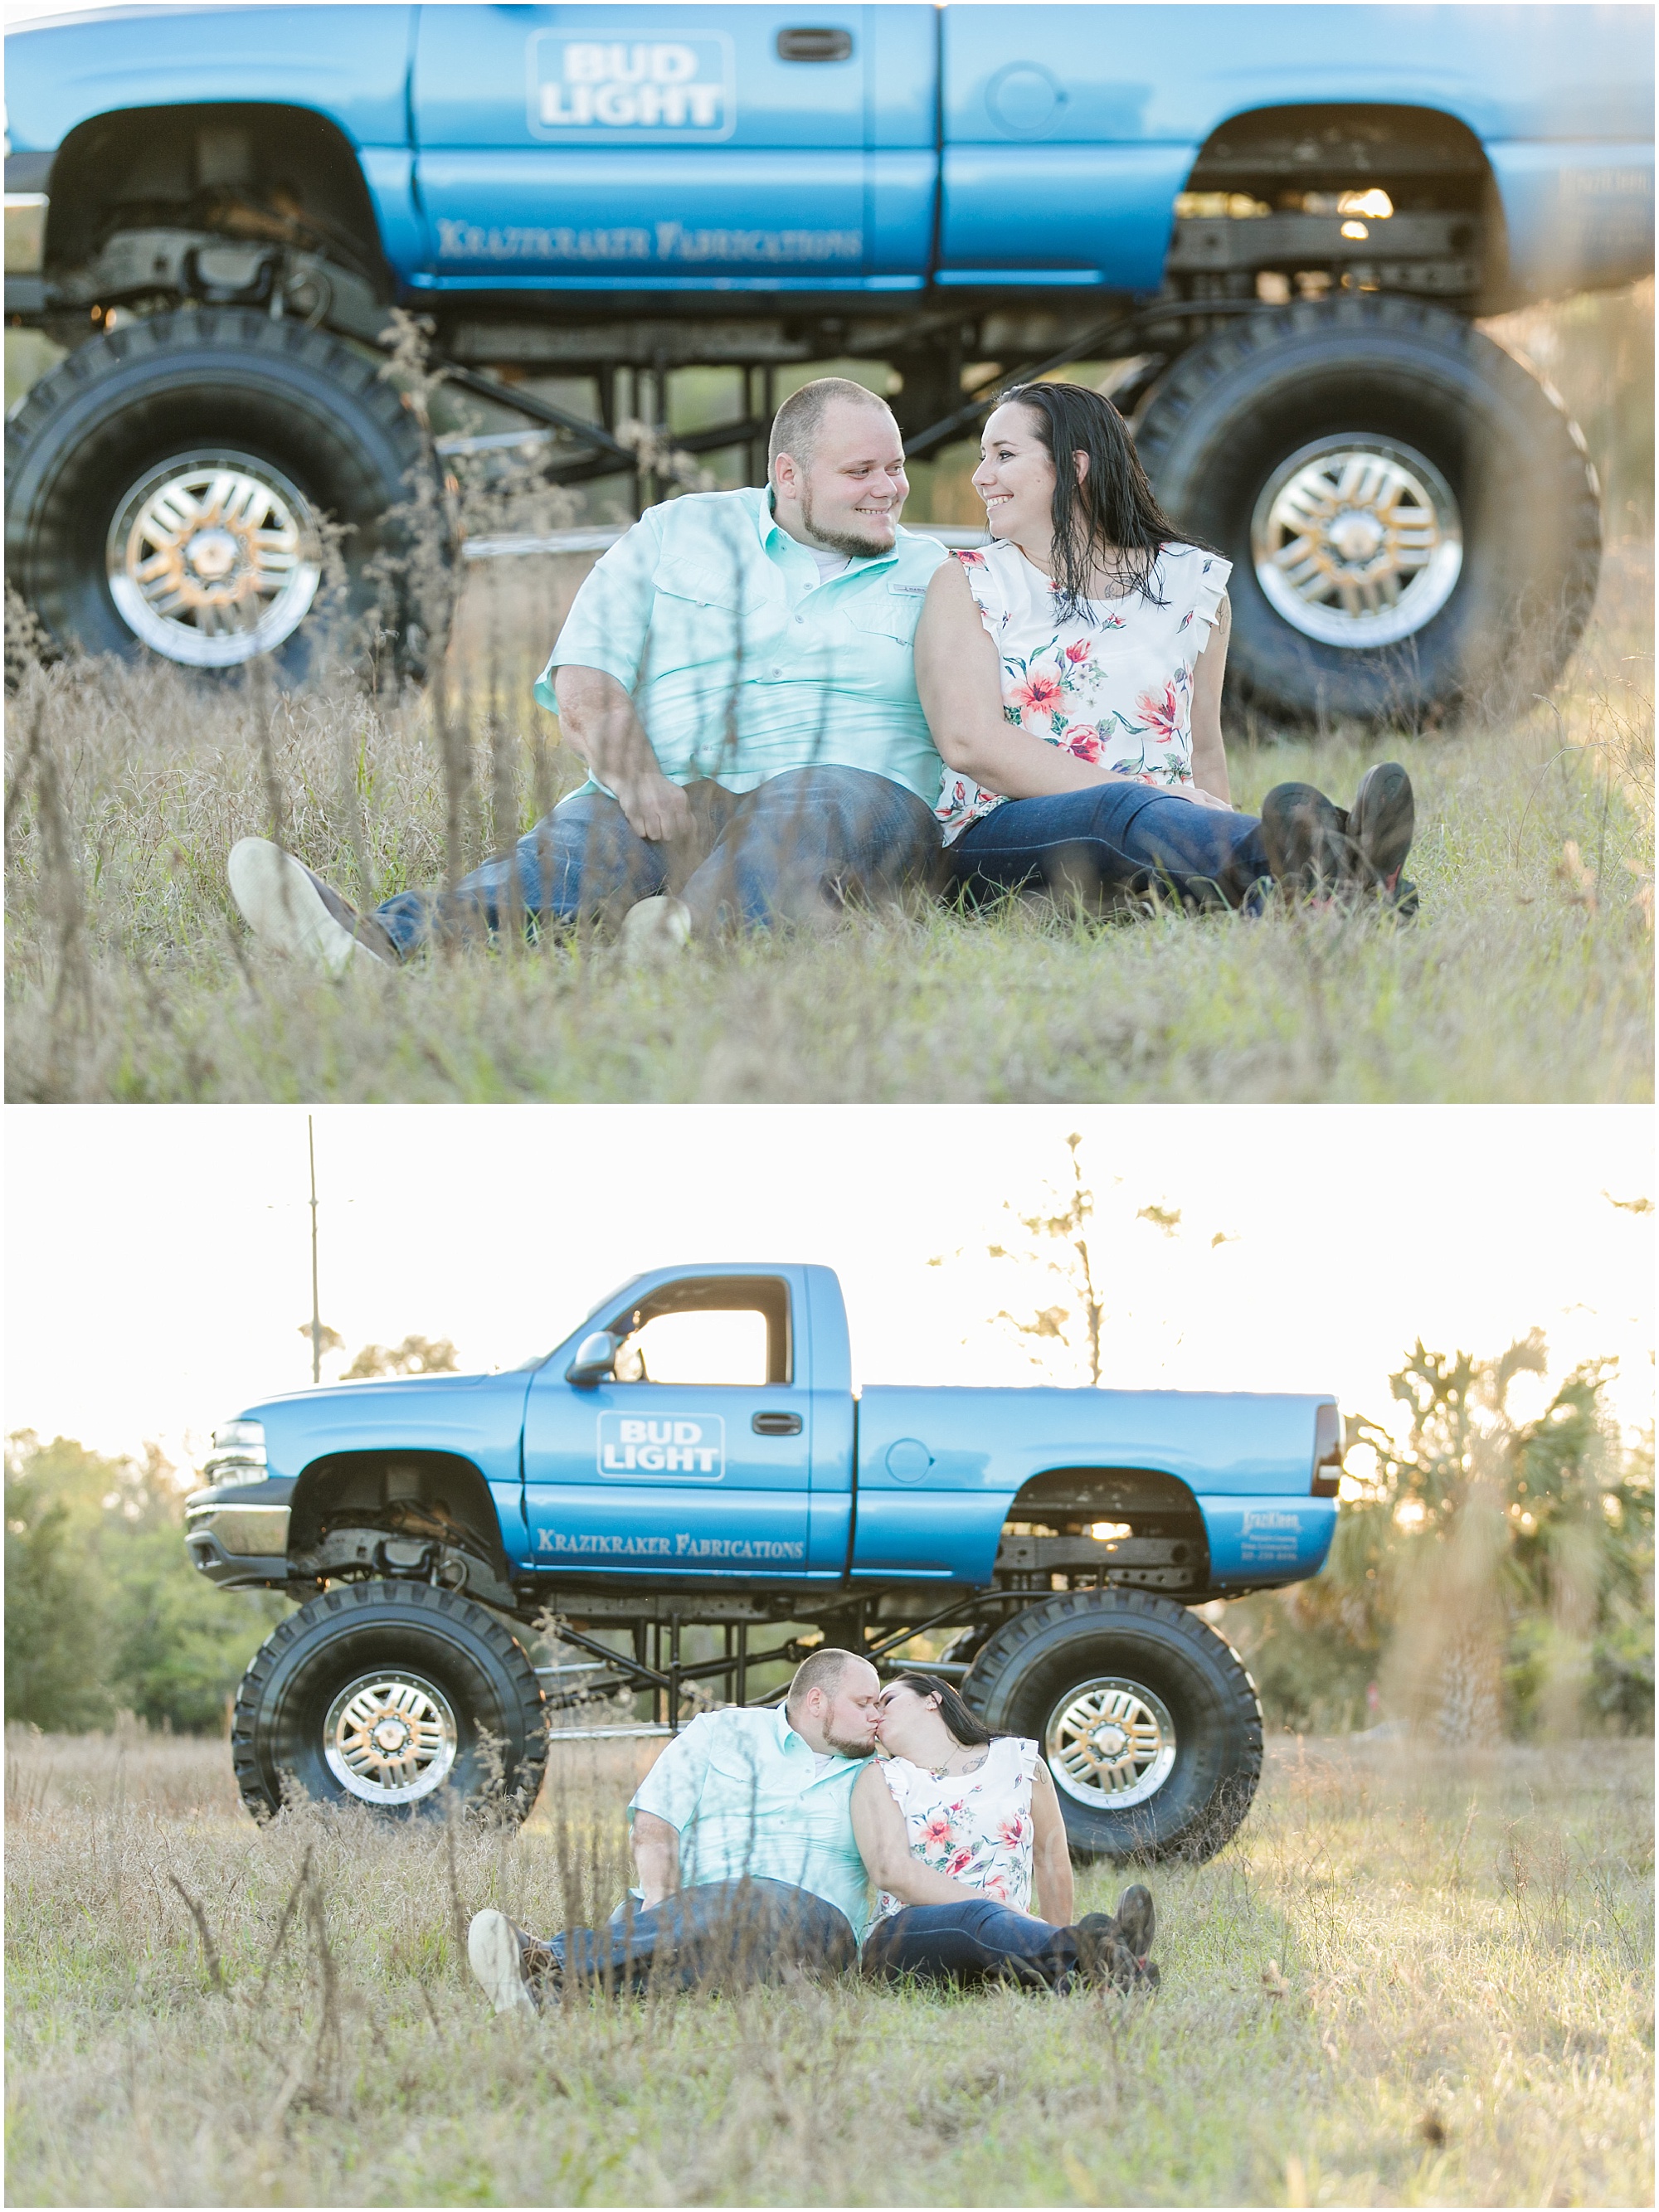 Couple sitting on the ground in a field with their Monster Truck behind them.